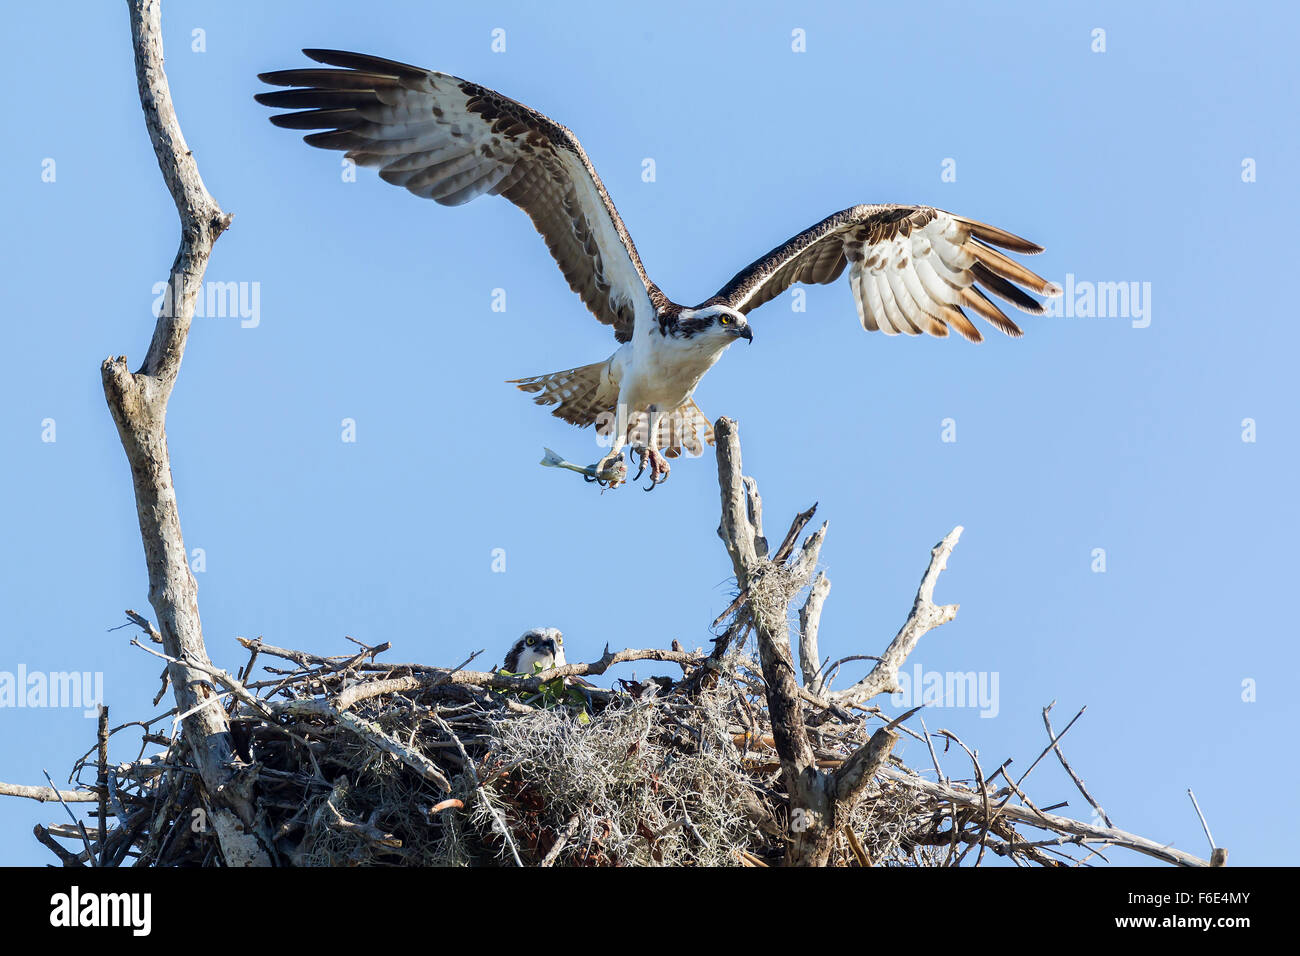 Osprey (Pandion haliaetus carolinensis), with outstretched wings and prey at nest, with fledgling, Florida, USA Stock Photo